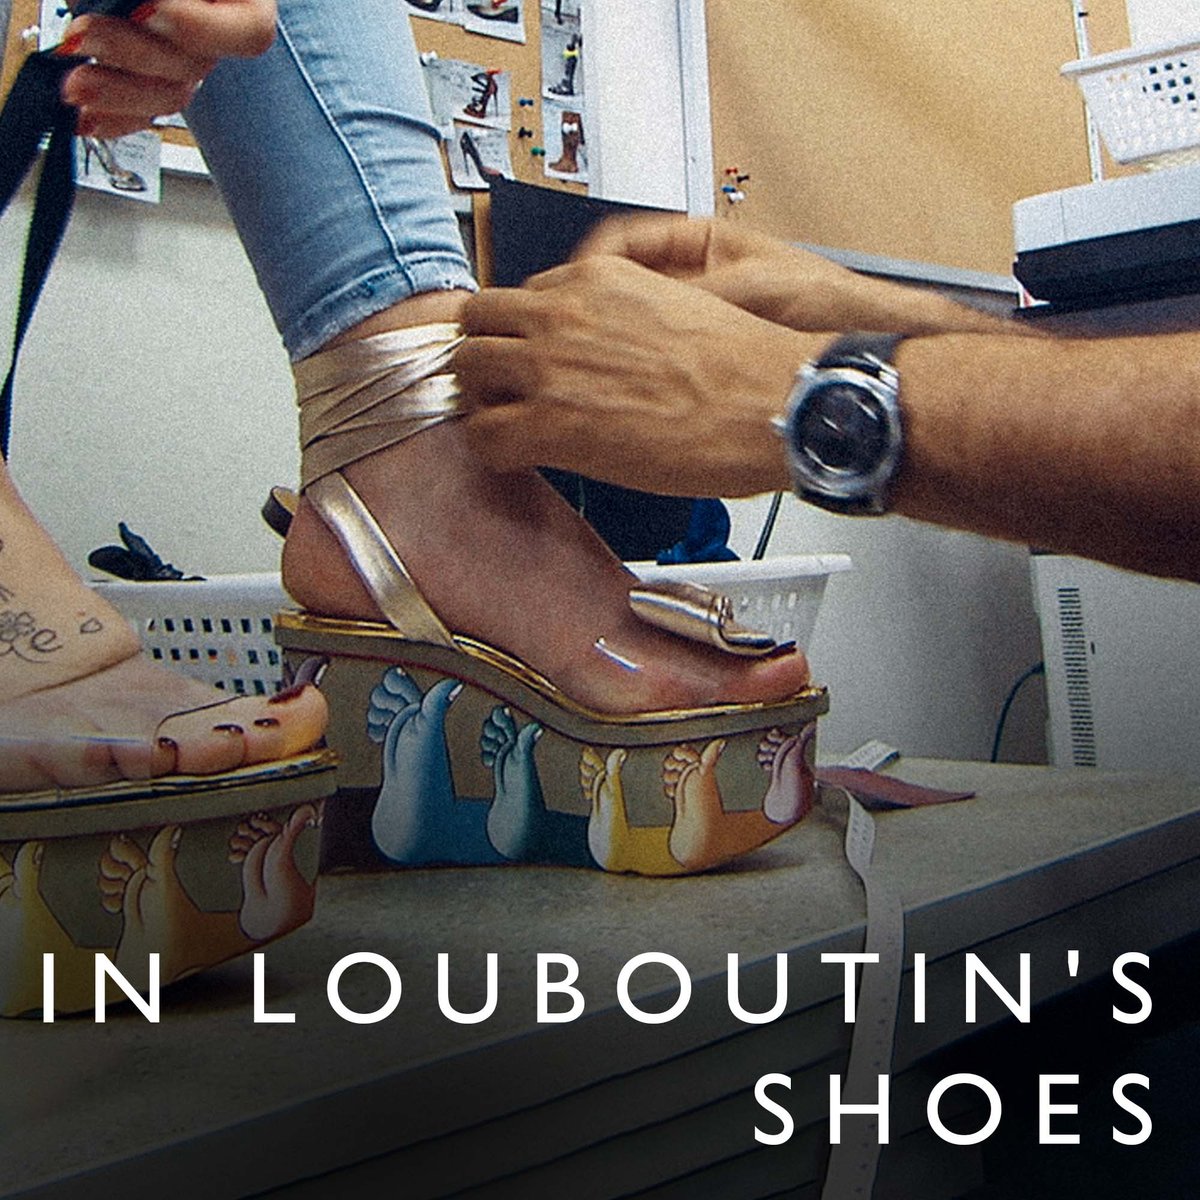 How did Louboutin go from a luxury style secret to a status symbol? Previously only worn by the fashion elite, his red-soled super-heels are now recognized all over the world. See the designer at home in Paris and at his workshops: bit.ly/3T4OULO